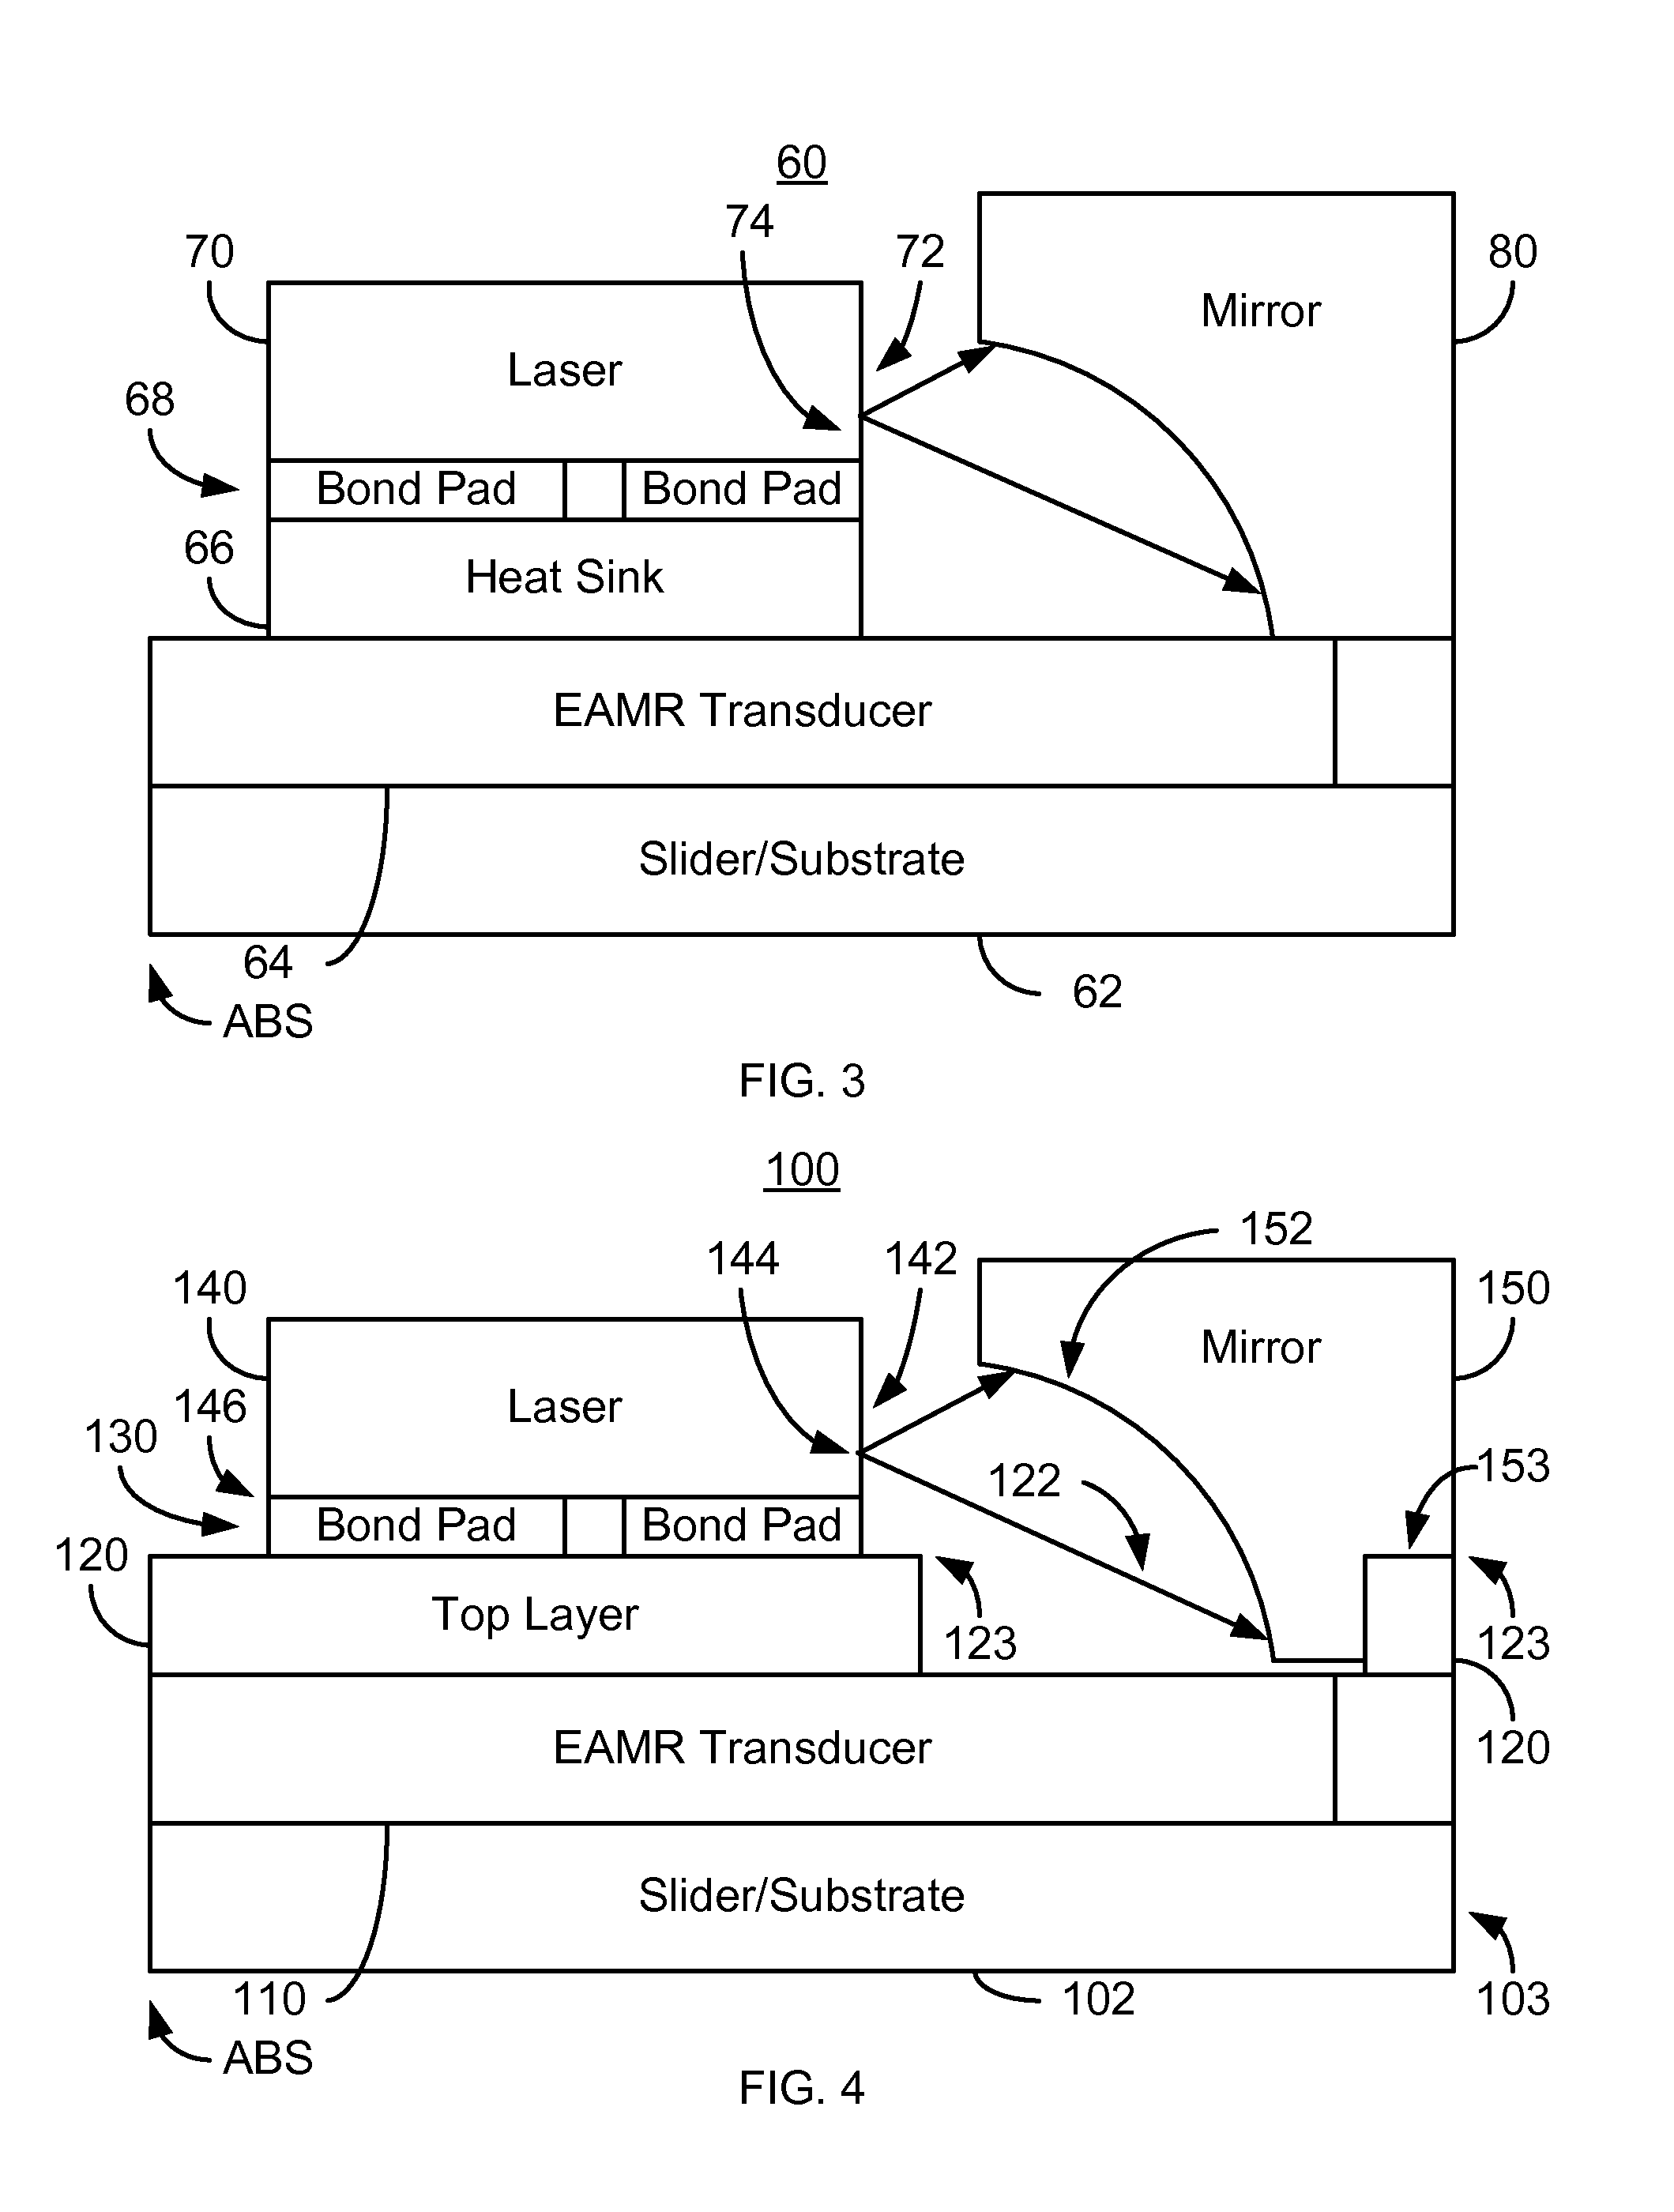 Method for providing an energy assisted magnetic recording (EAMR) head